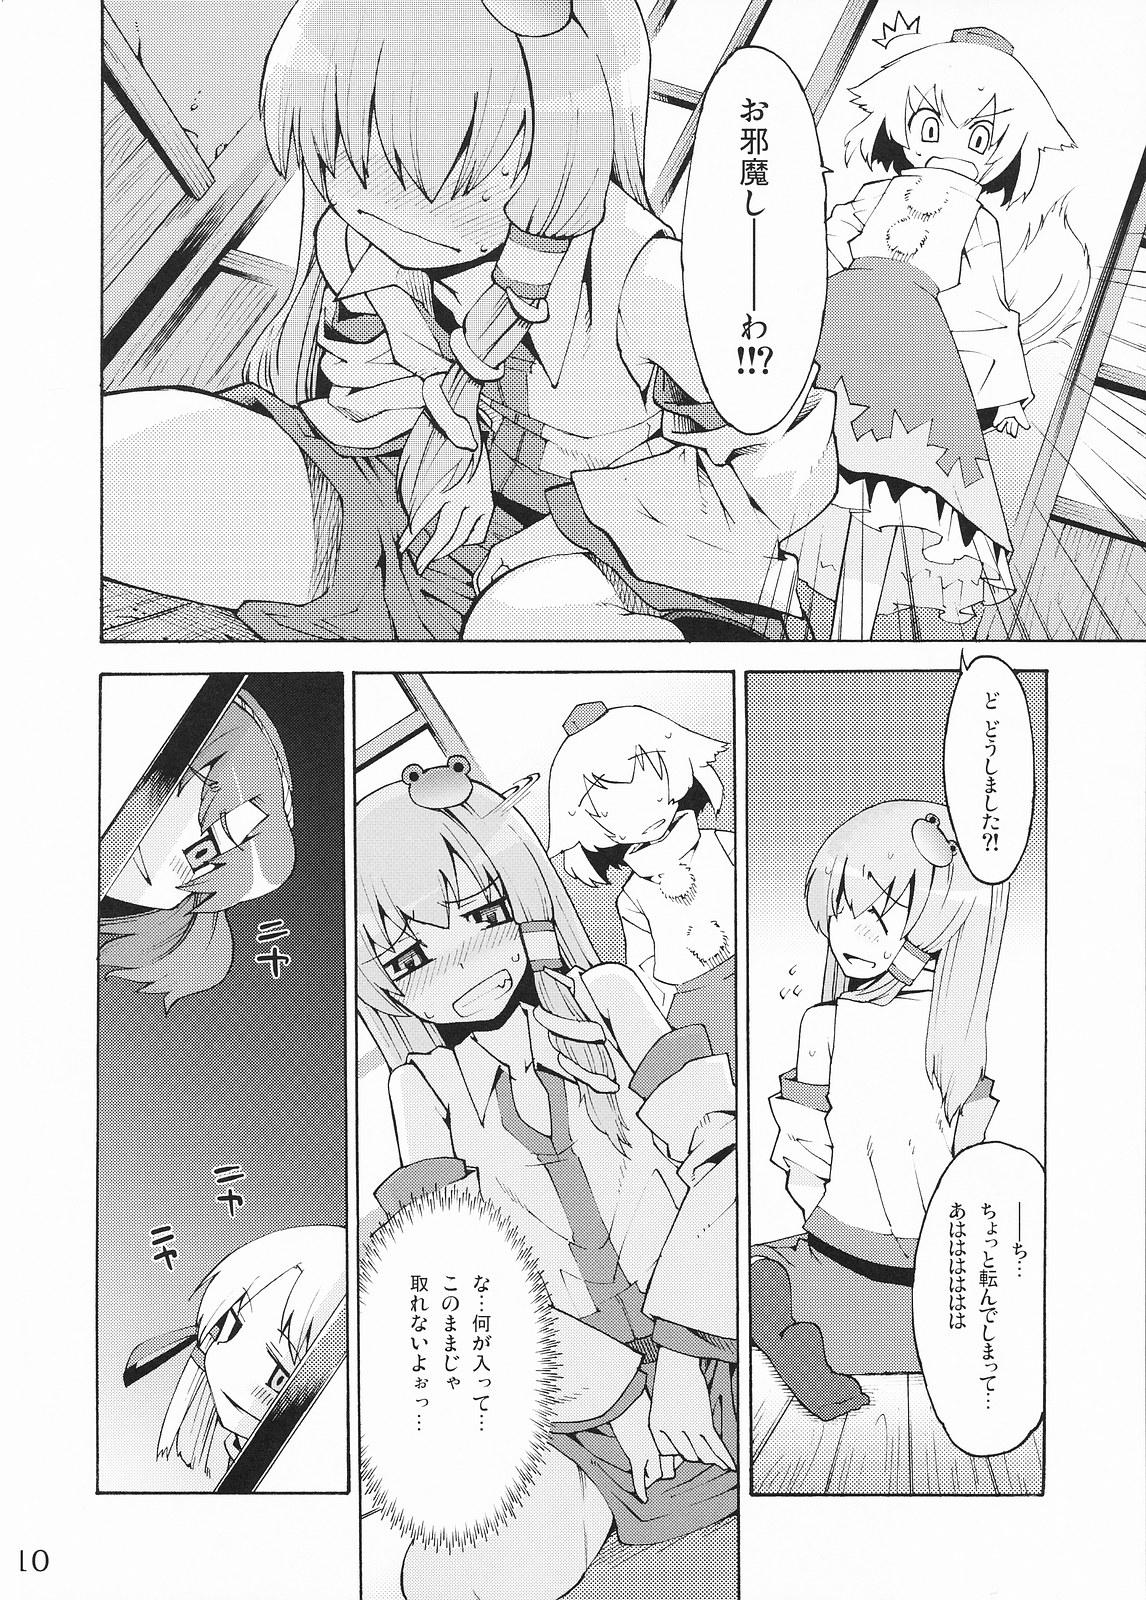 Linda Kami-sama to Issho! Happy every day! - Touhou project Penis - Page 10